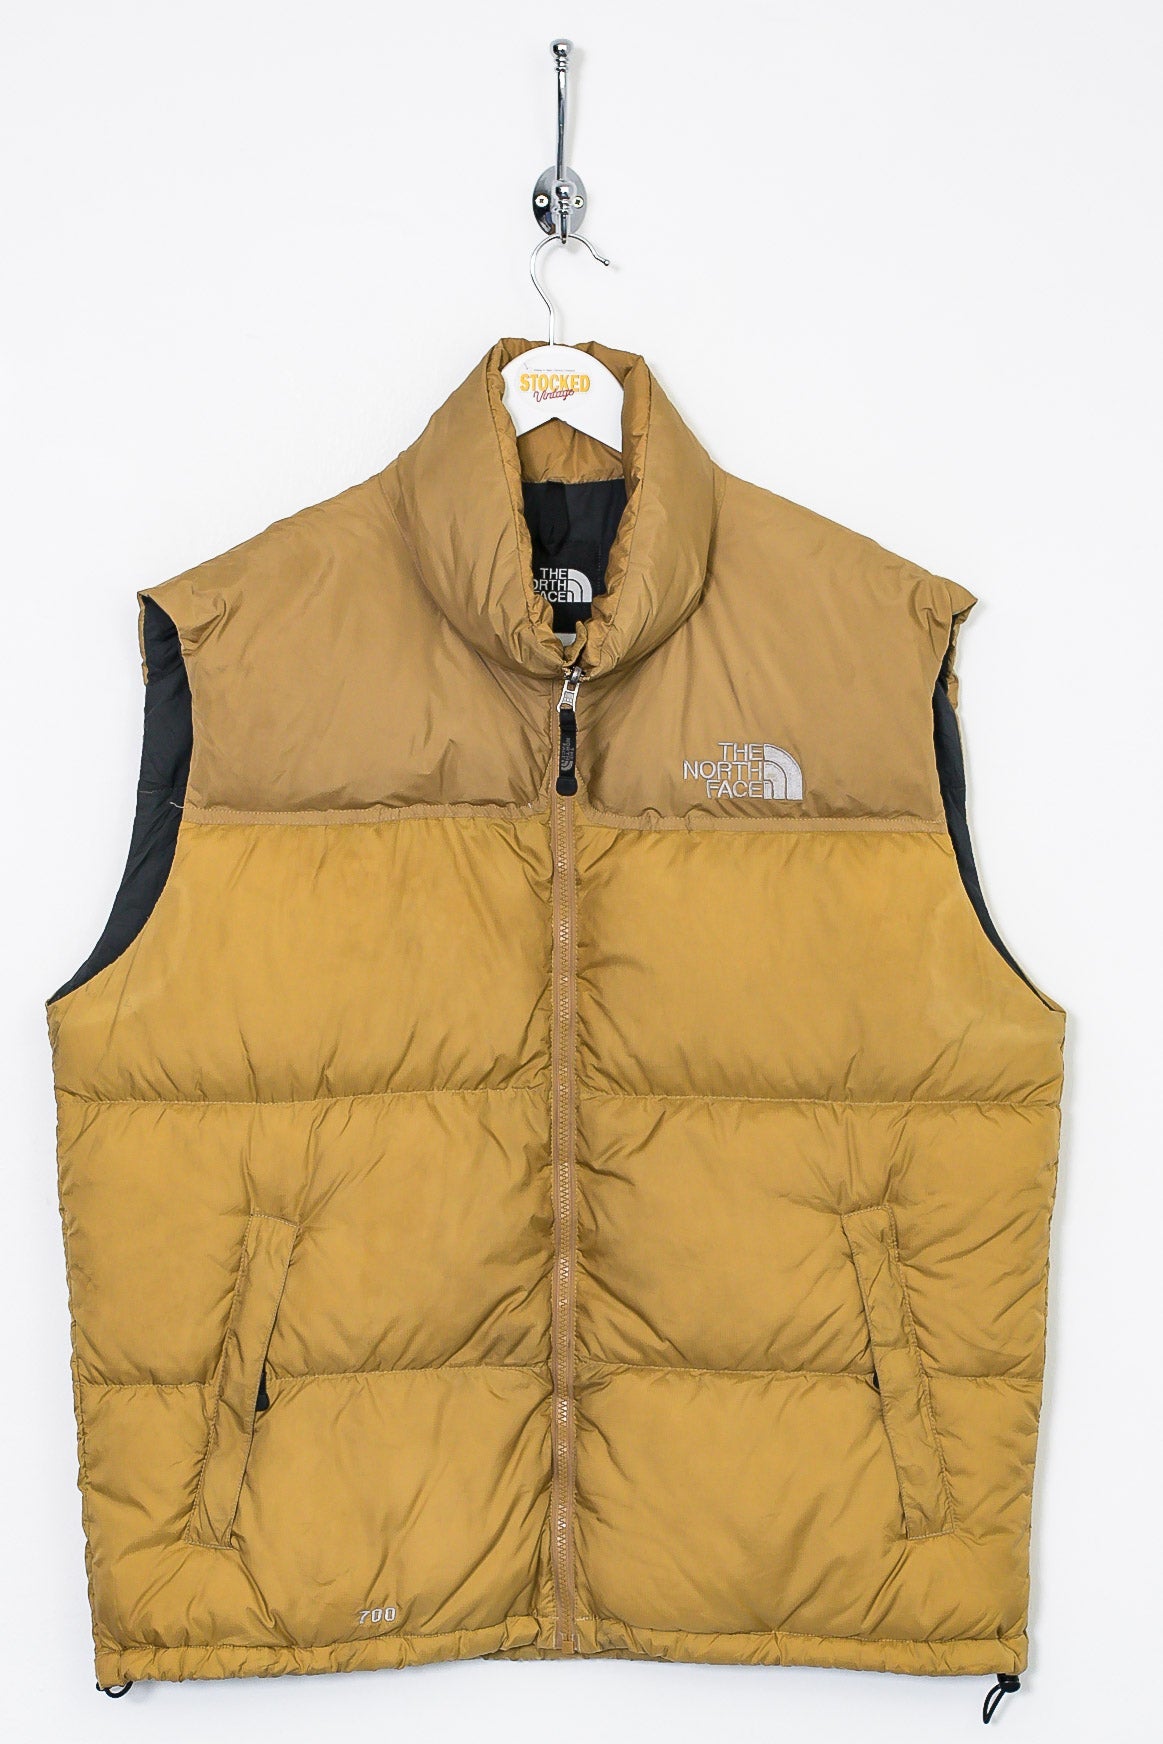 The North Face 700 Fill Gilet Puffer Jacket (XL)